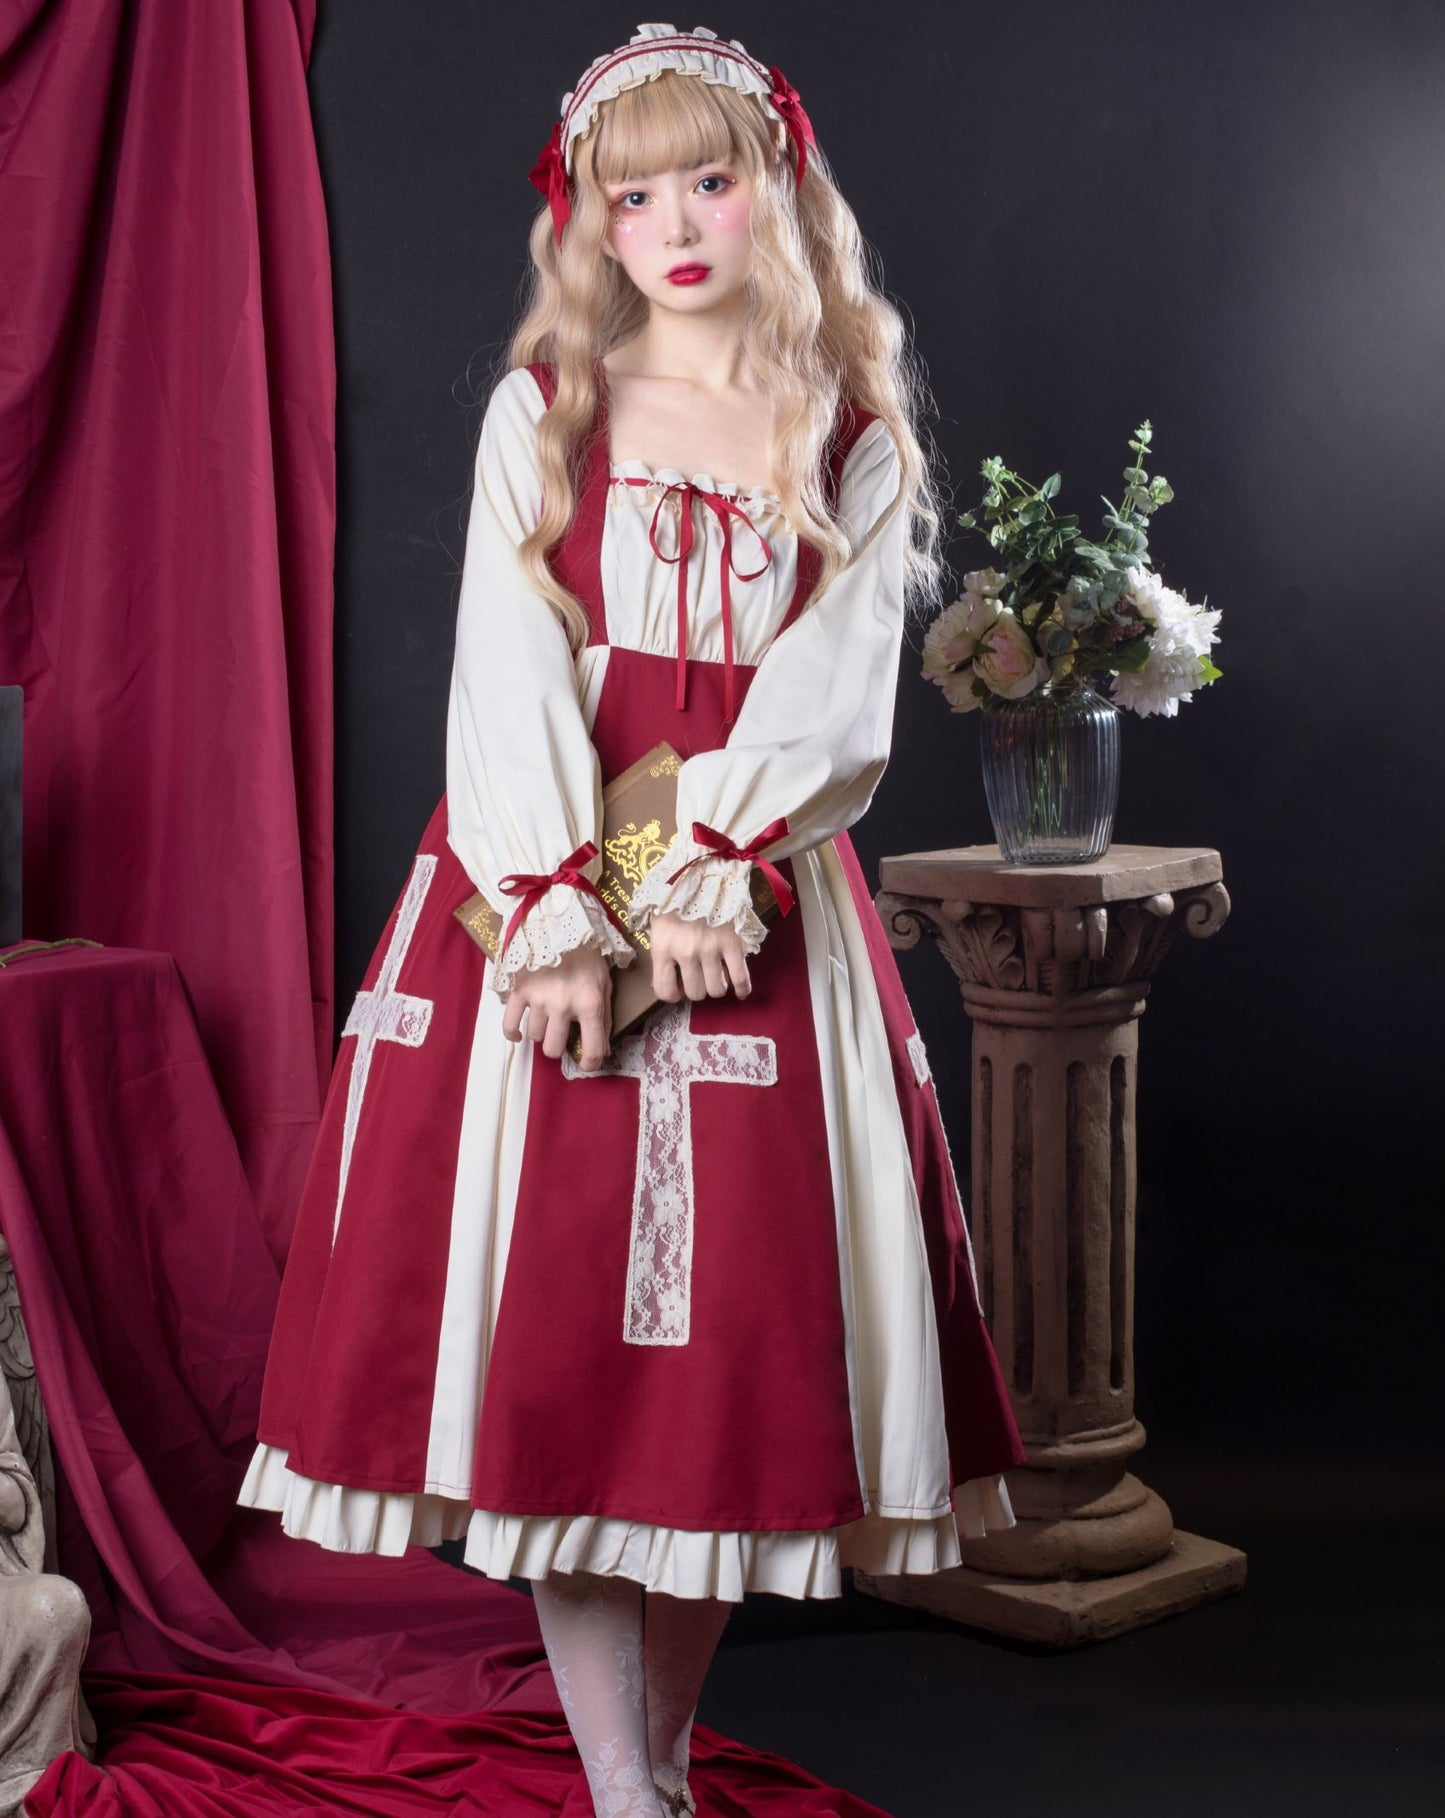 Lace cross classical dress with cape